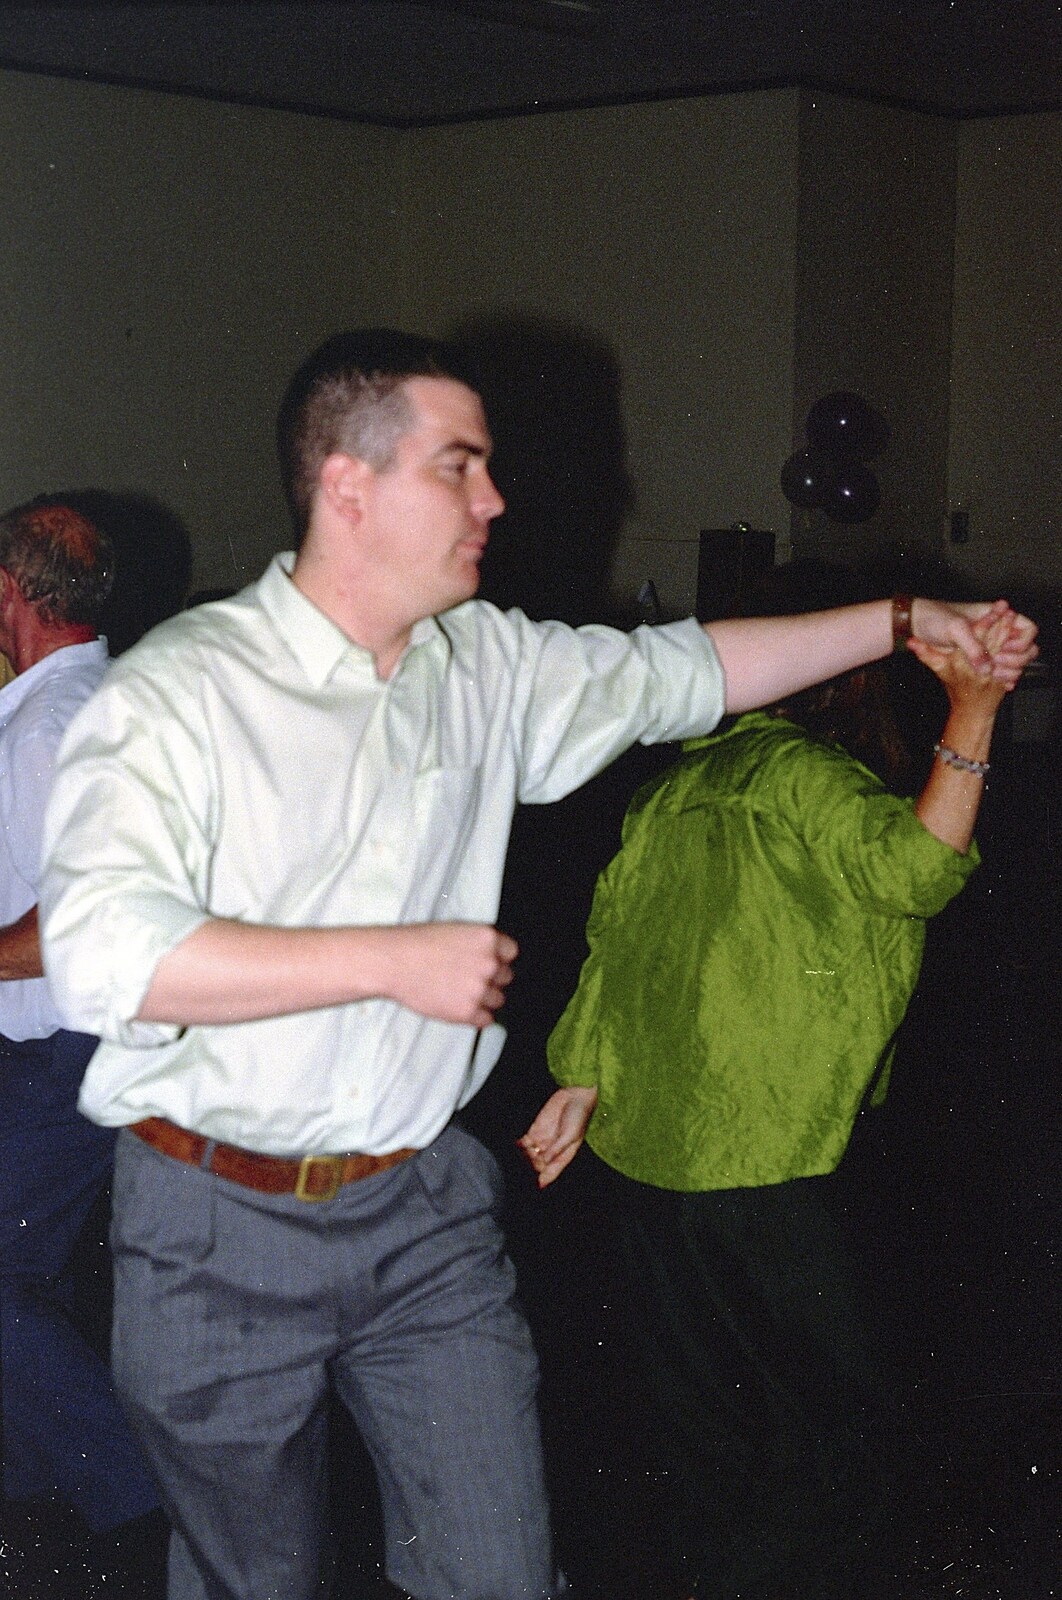 Jon dances with Lolly from Sean and Michelle's Wedding, Bashley FC, New Milton - 12th August 2000